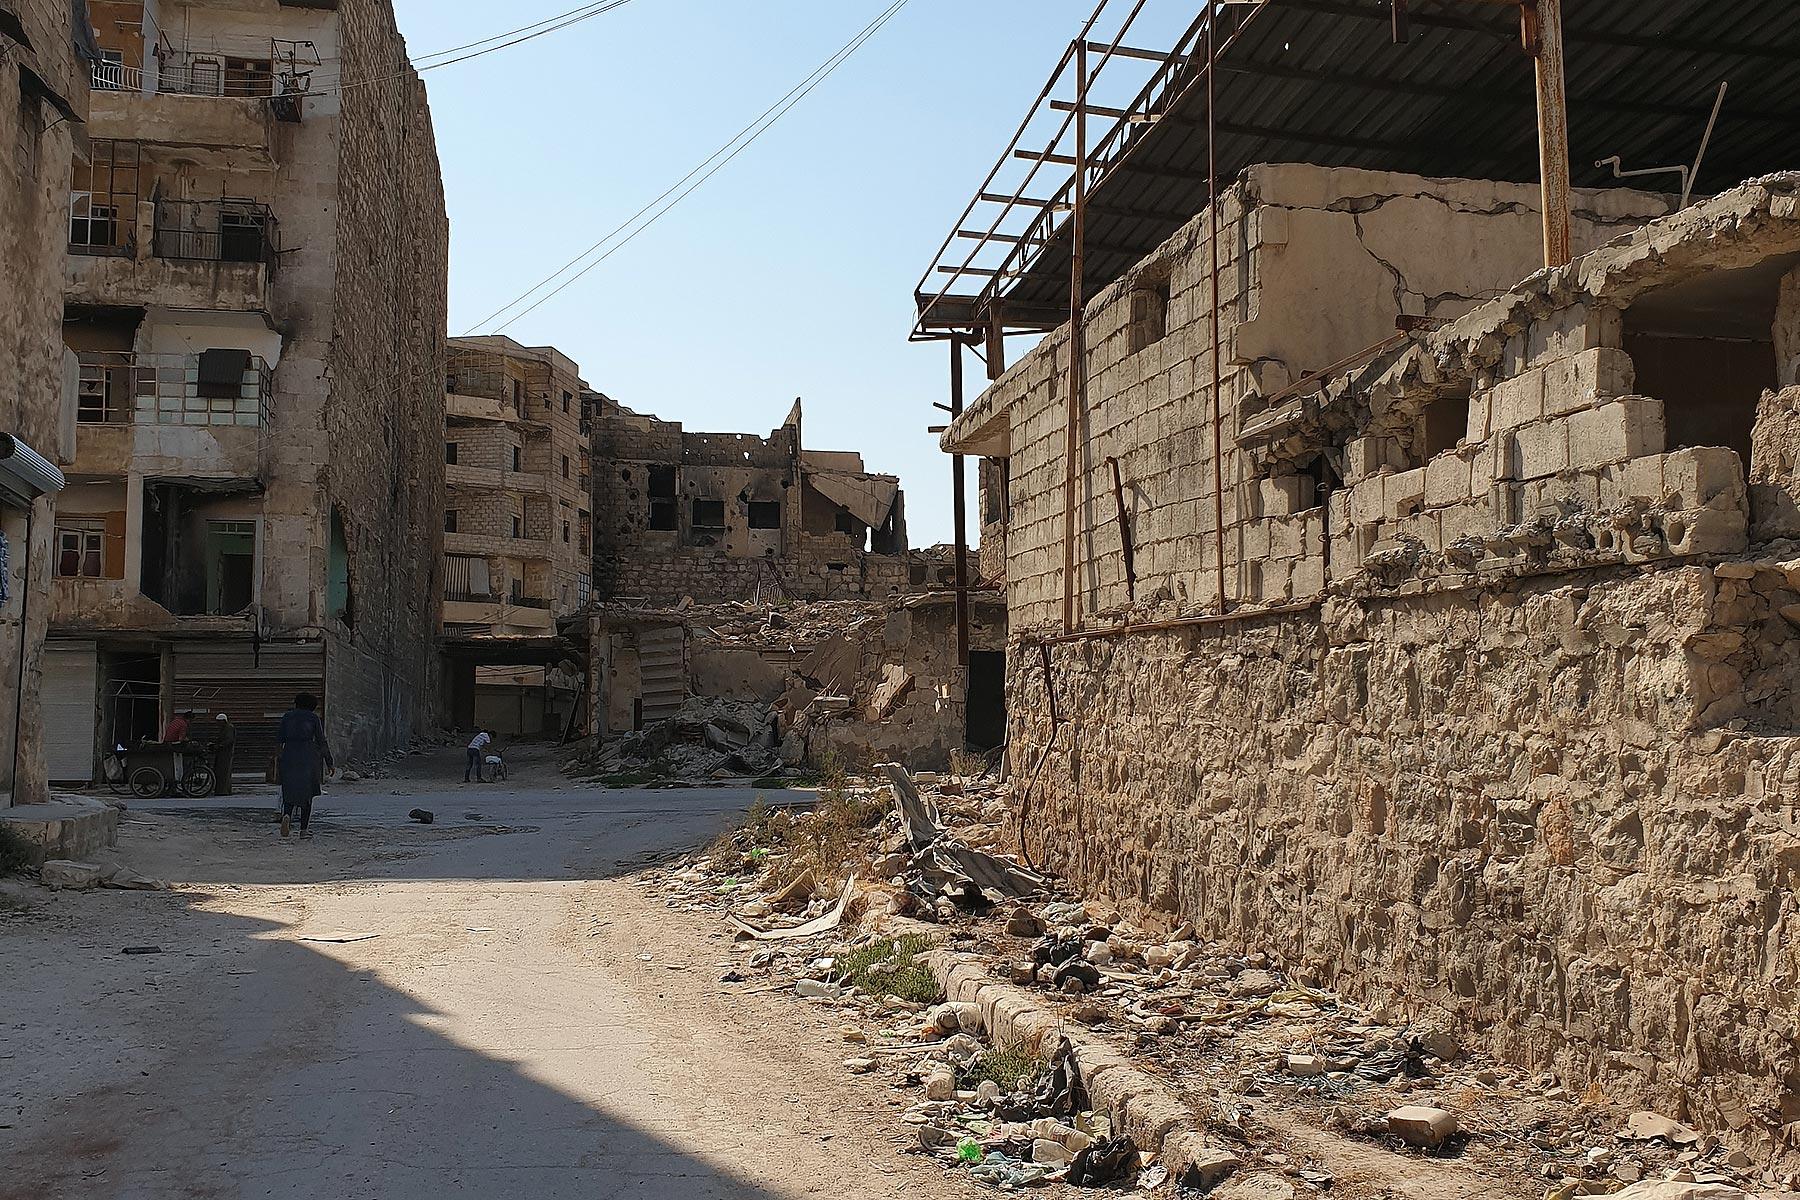 LWF and Islamic Relief Worldwide issue a joint appeal for a ceasefire in Syria and other countries where conflict is hampering humanitarian efforts to help those facing increased suffering as a result of COVID-19. Photo: LWF/R. Schlott 